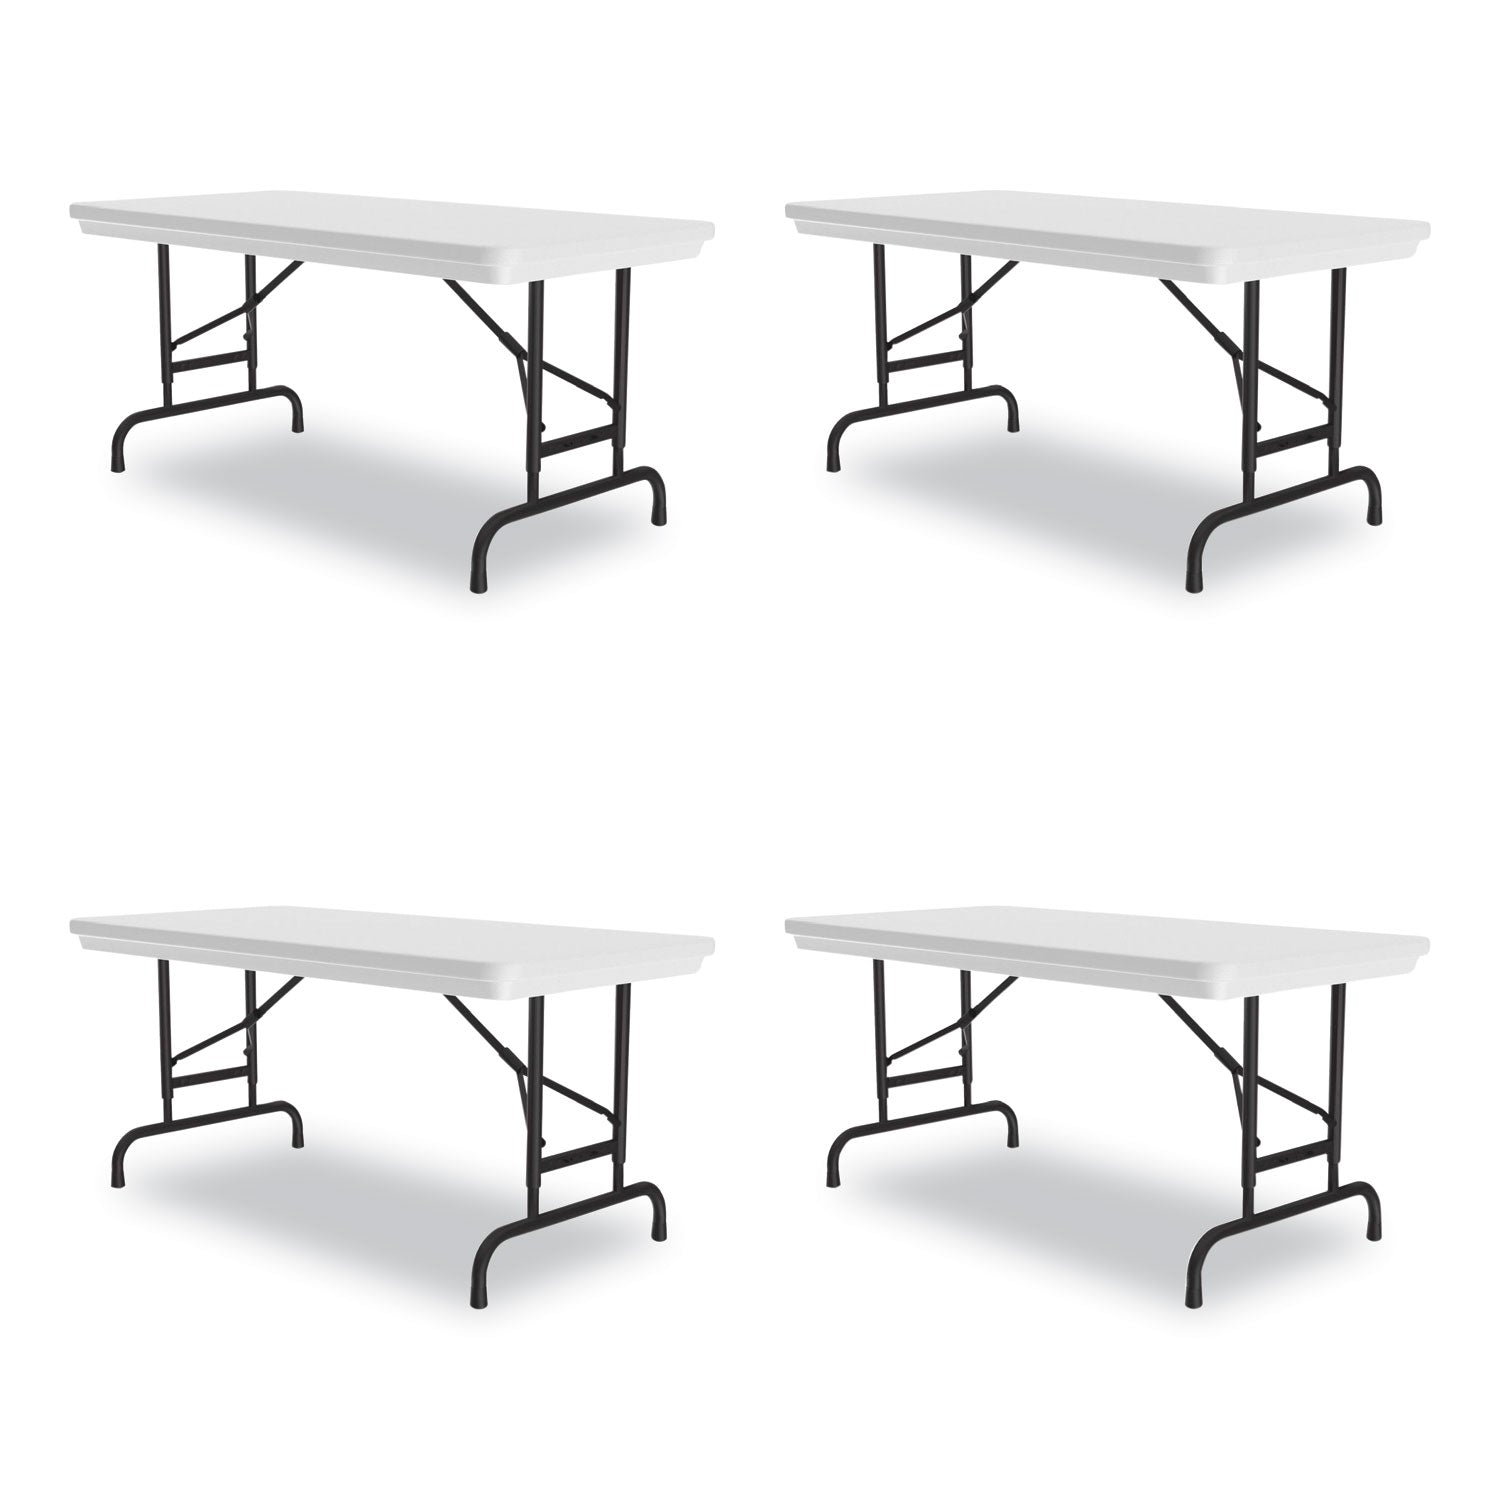 adjustable-folding-table-rectangular-48-x-24-x-22-to-32-gray-top-black-legs-4-pallet-ships-in-4-6-business-days_crlra2448234p - 6